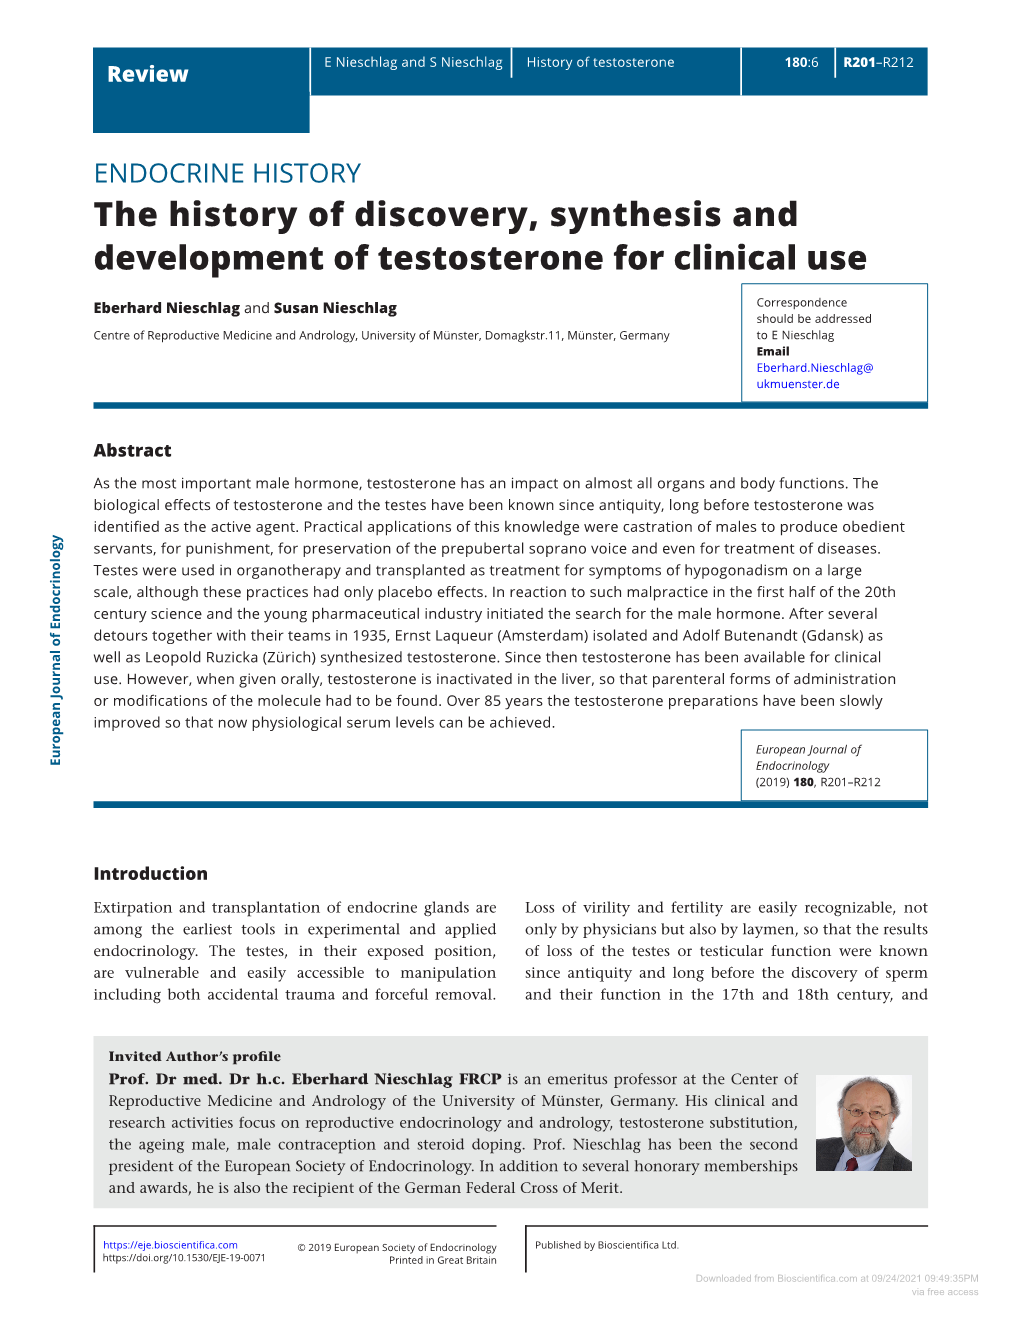 The History of Discovery, Synthesis and Development of Testosterone for Clinical